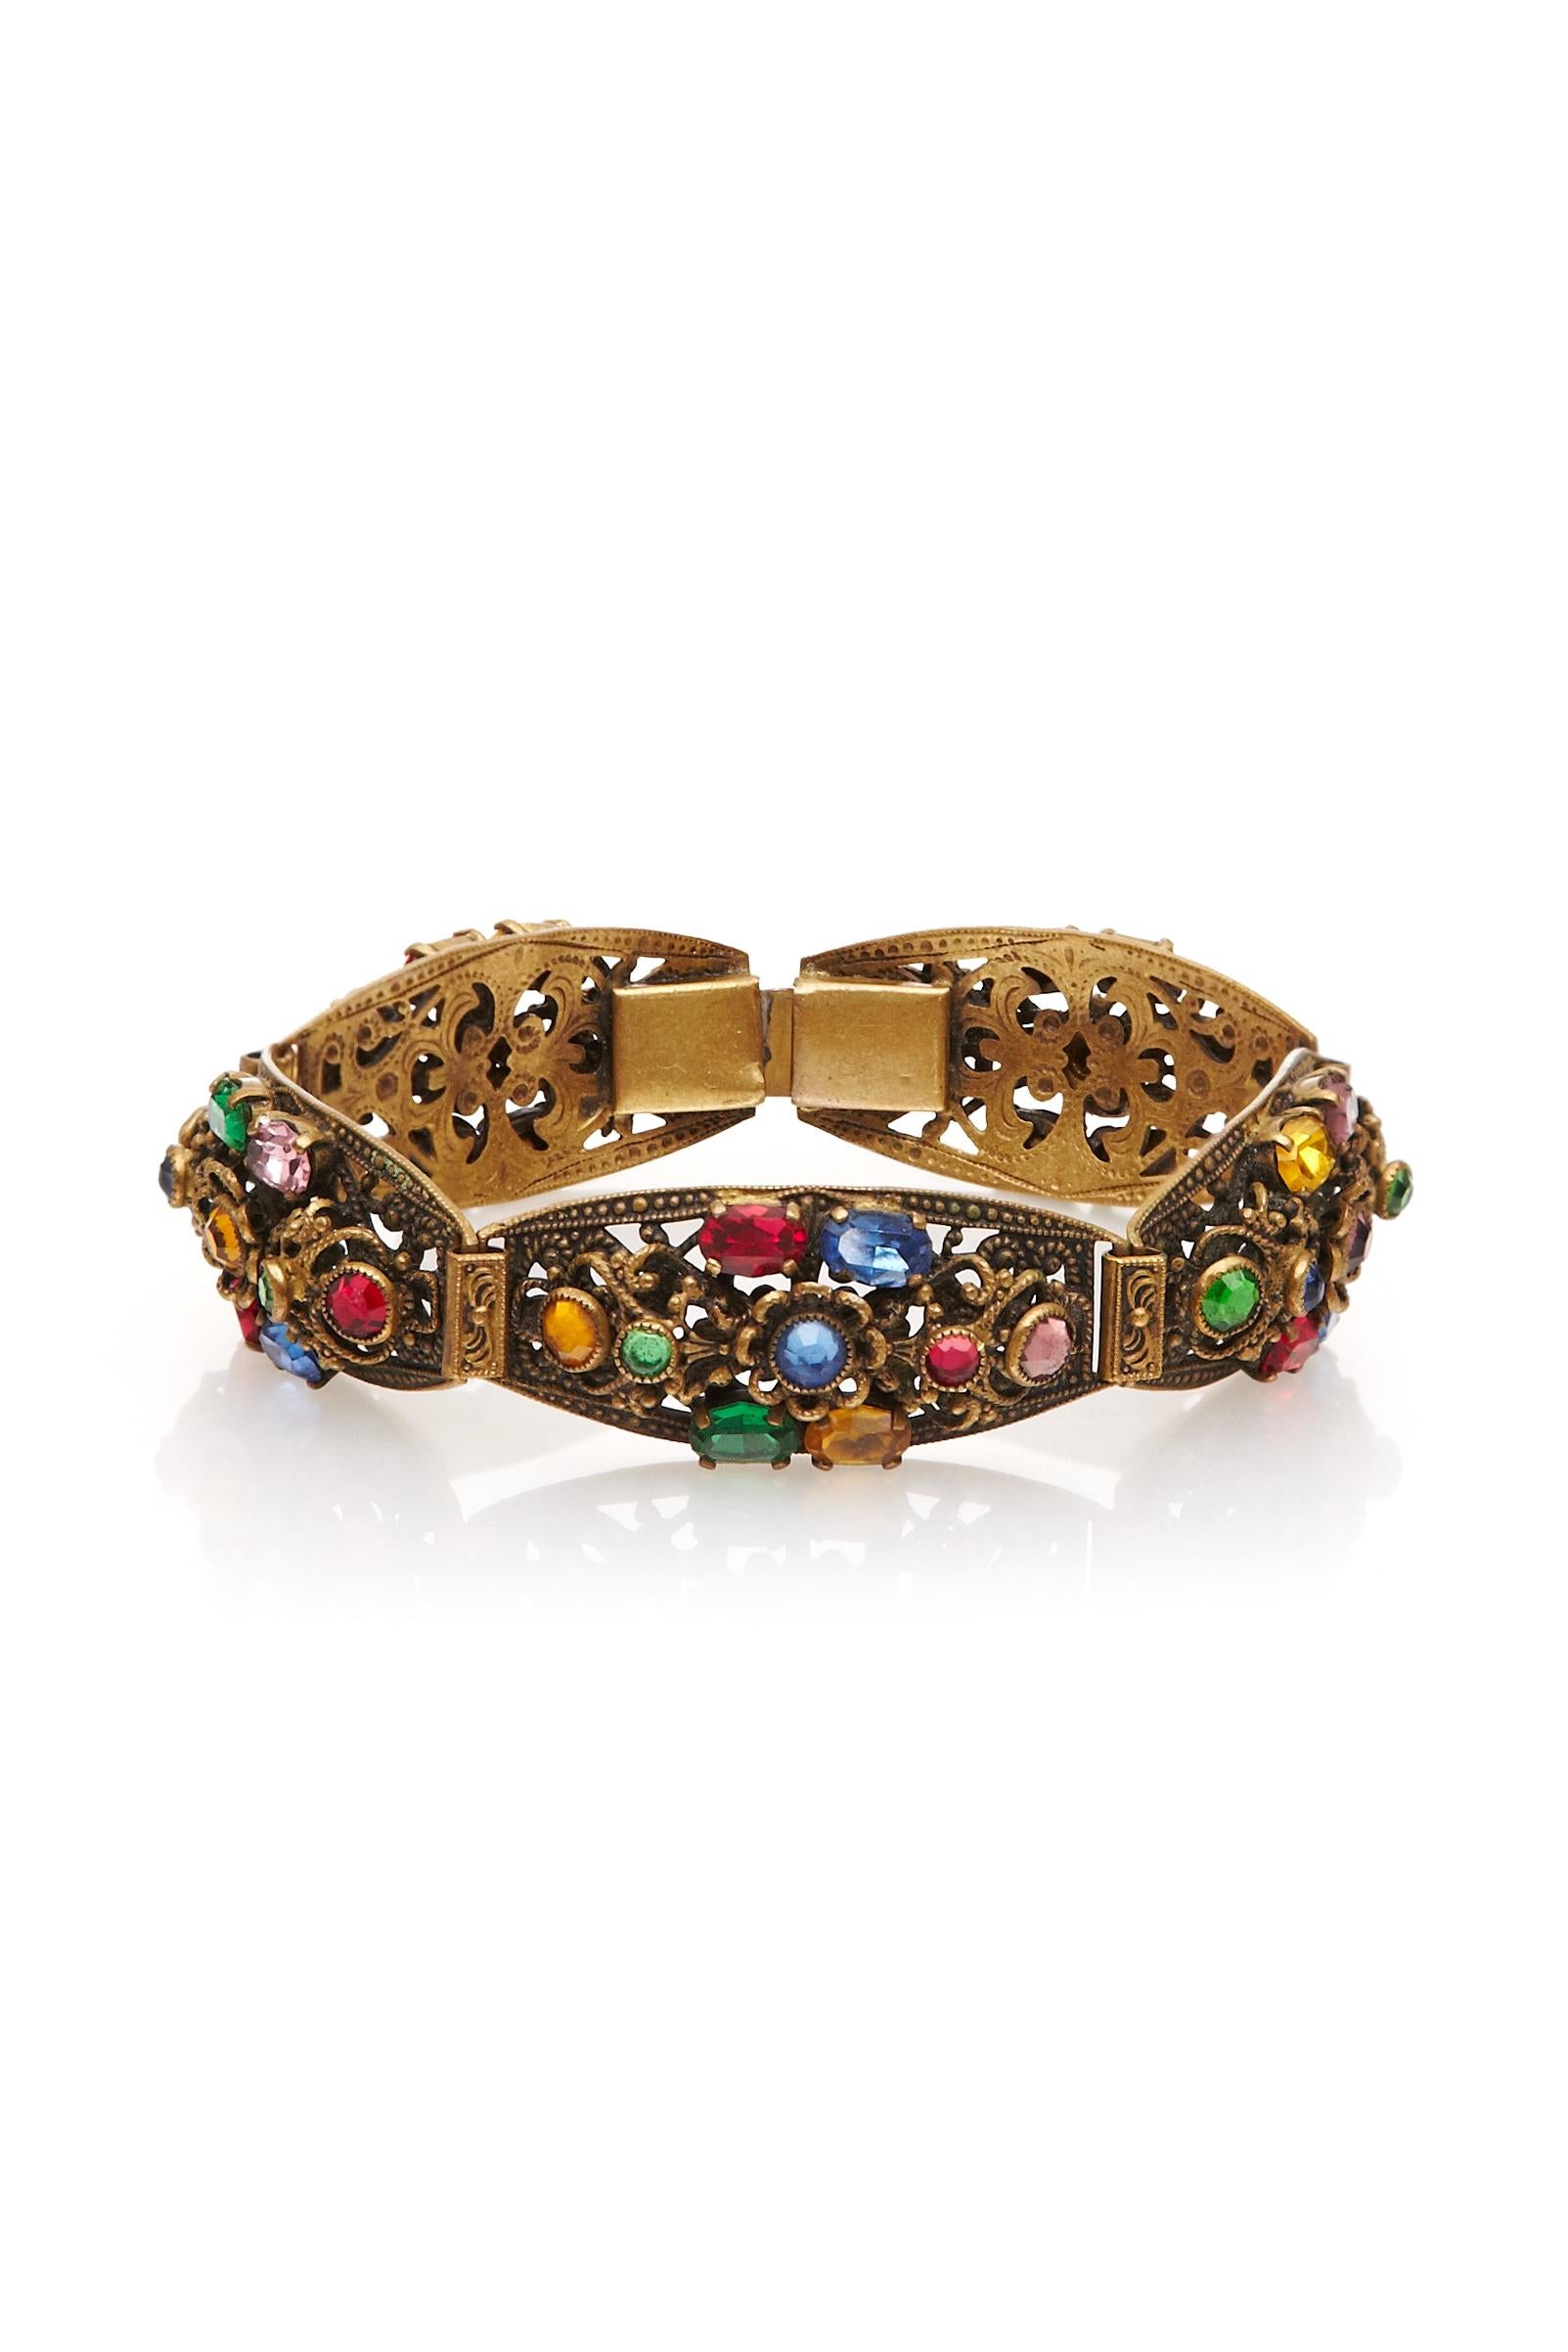 Beautiful 1930s bracelet made up of five articulated gilt metal sections with pretty multcoloured Czech glass decoration.  It fastens with a push clasp fastening and is in excellent condition.

Measurements:
Length: 19cm
Width: 1.7cm/ 0.7”